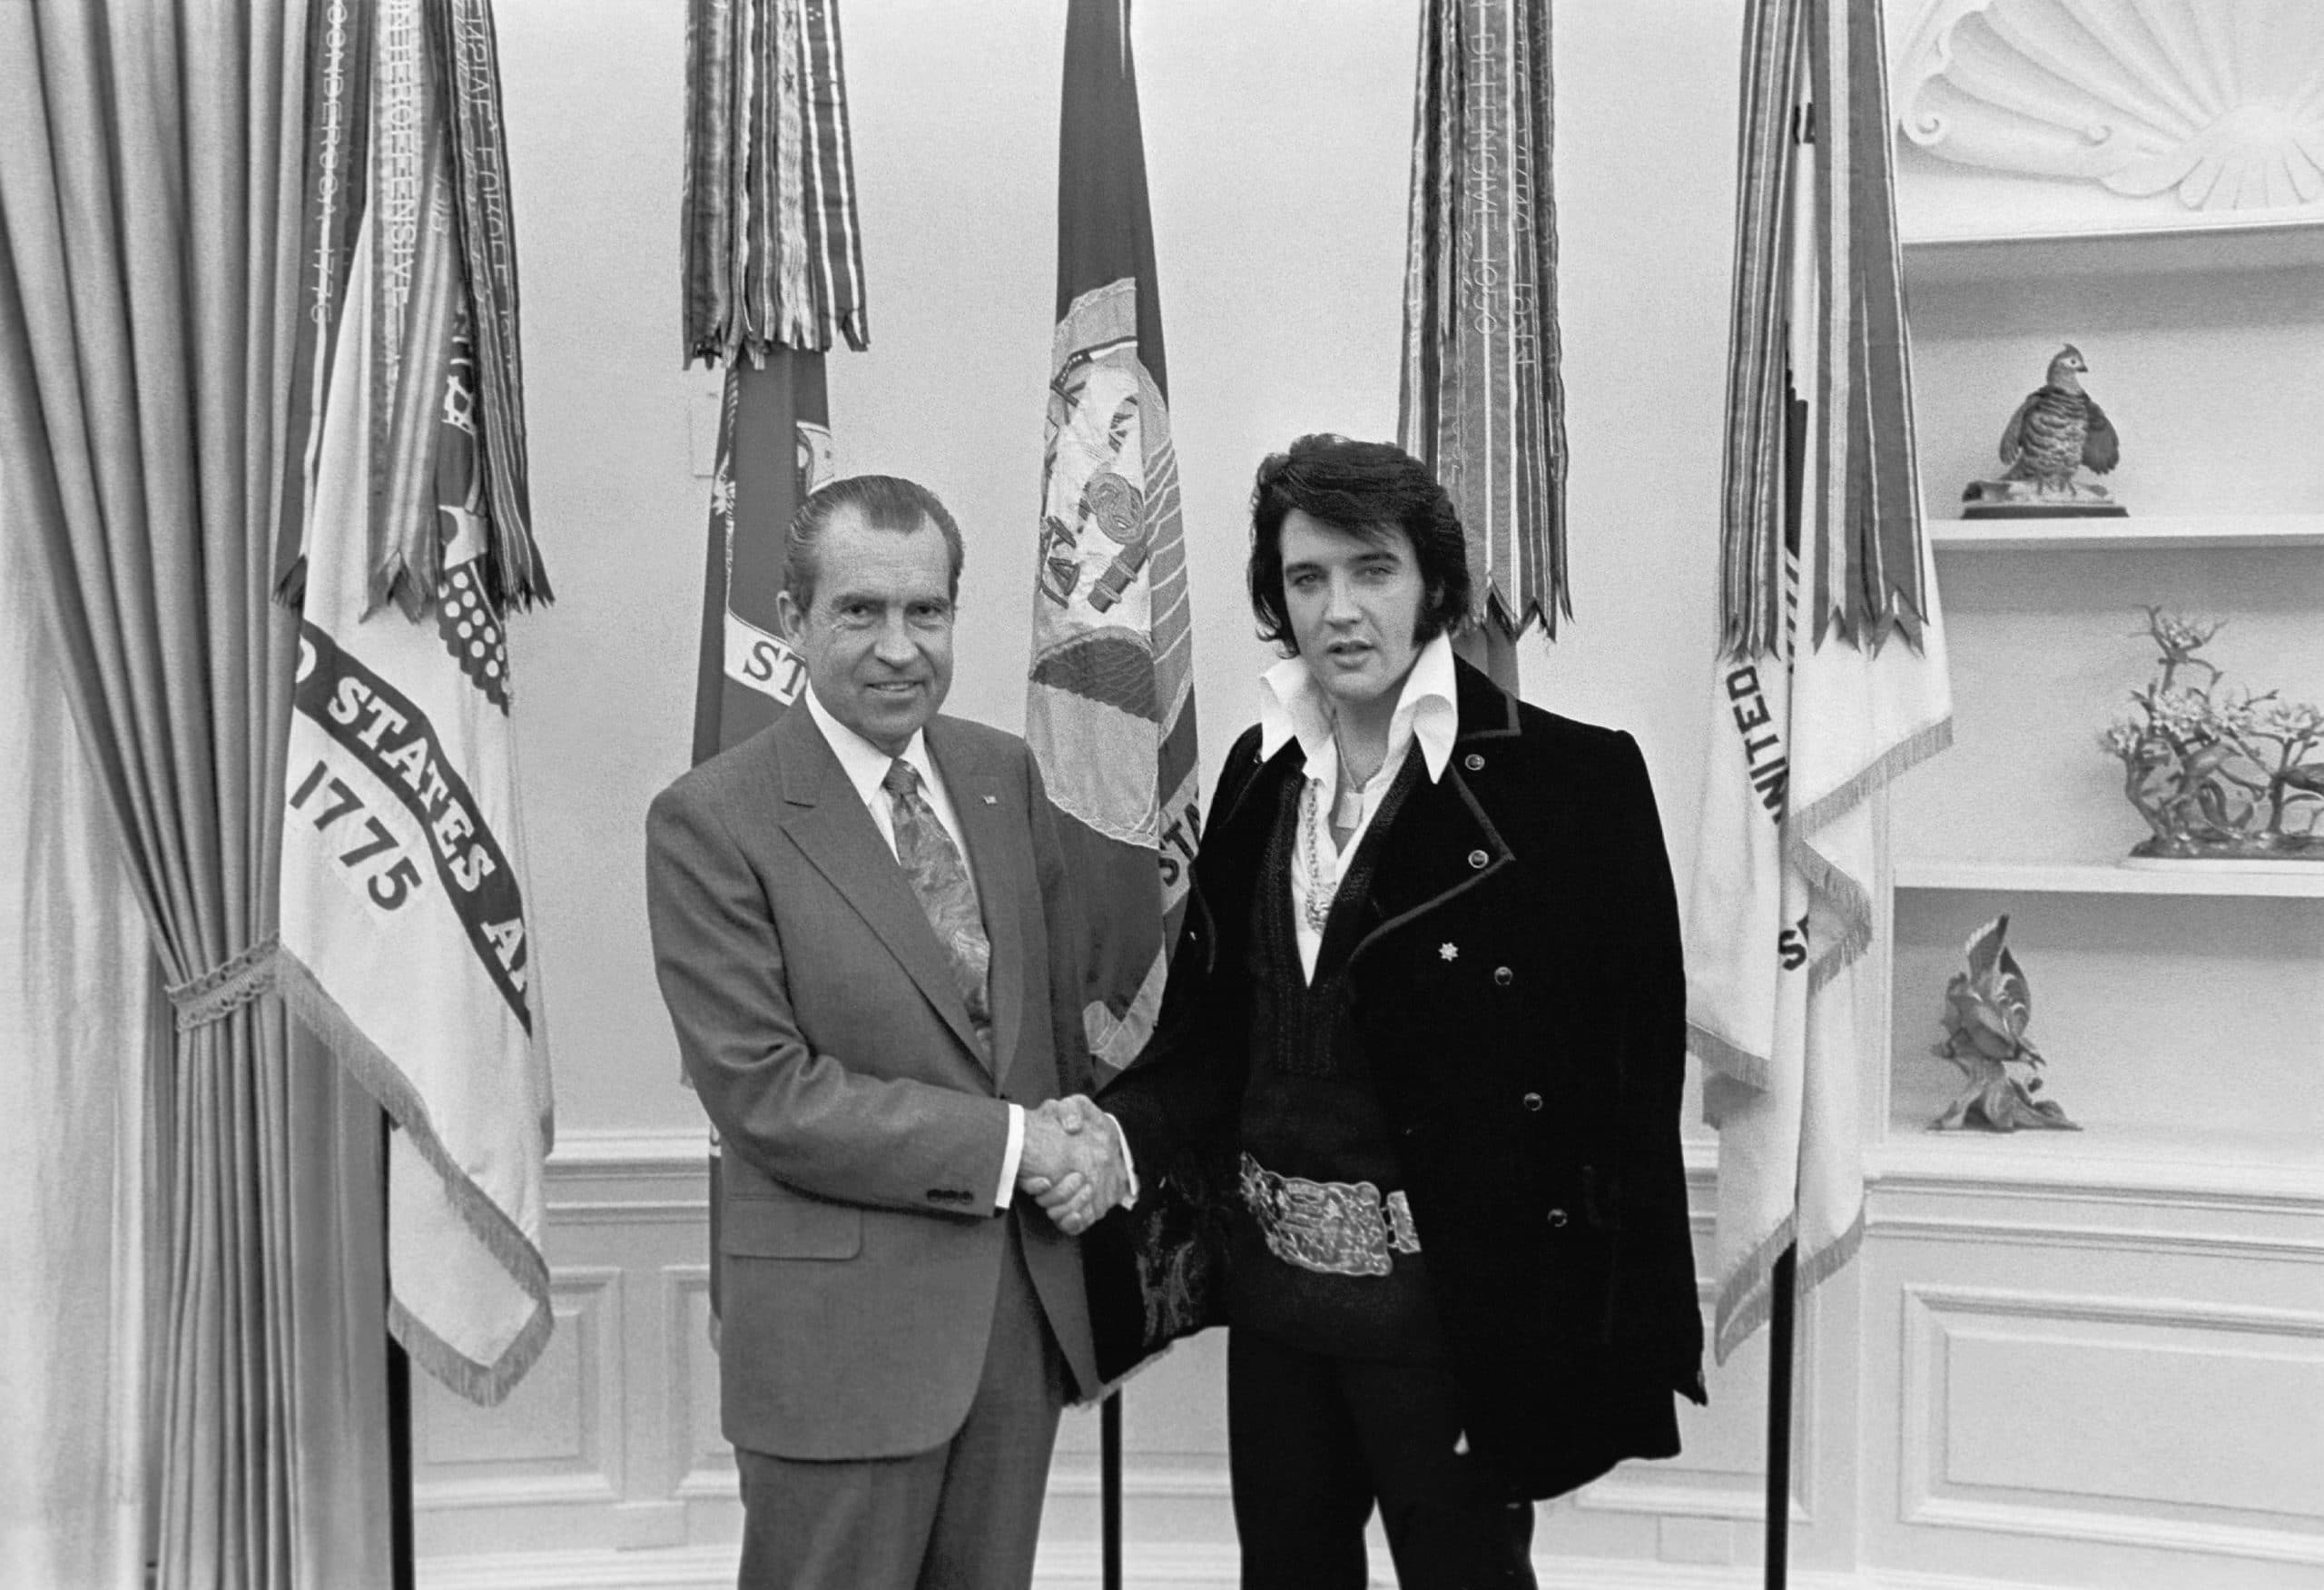 Remembering The Time Elvis Presley Called The Beatles 'Anti-American' To President Nixon